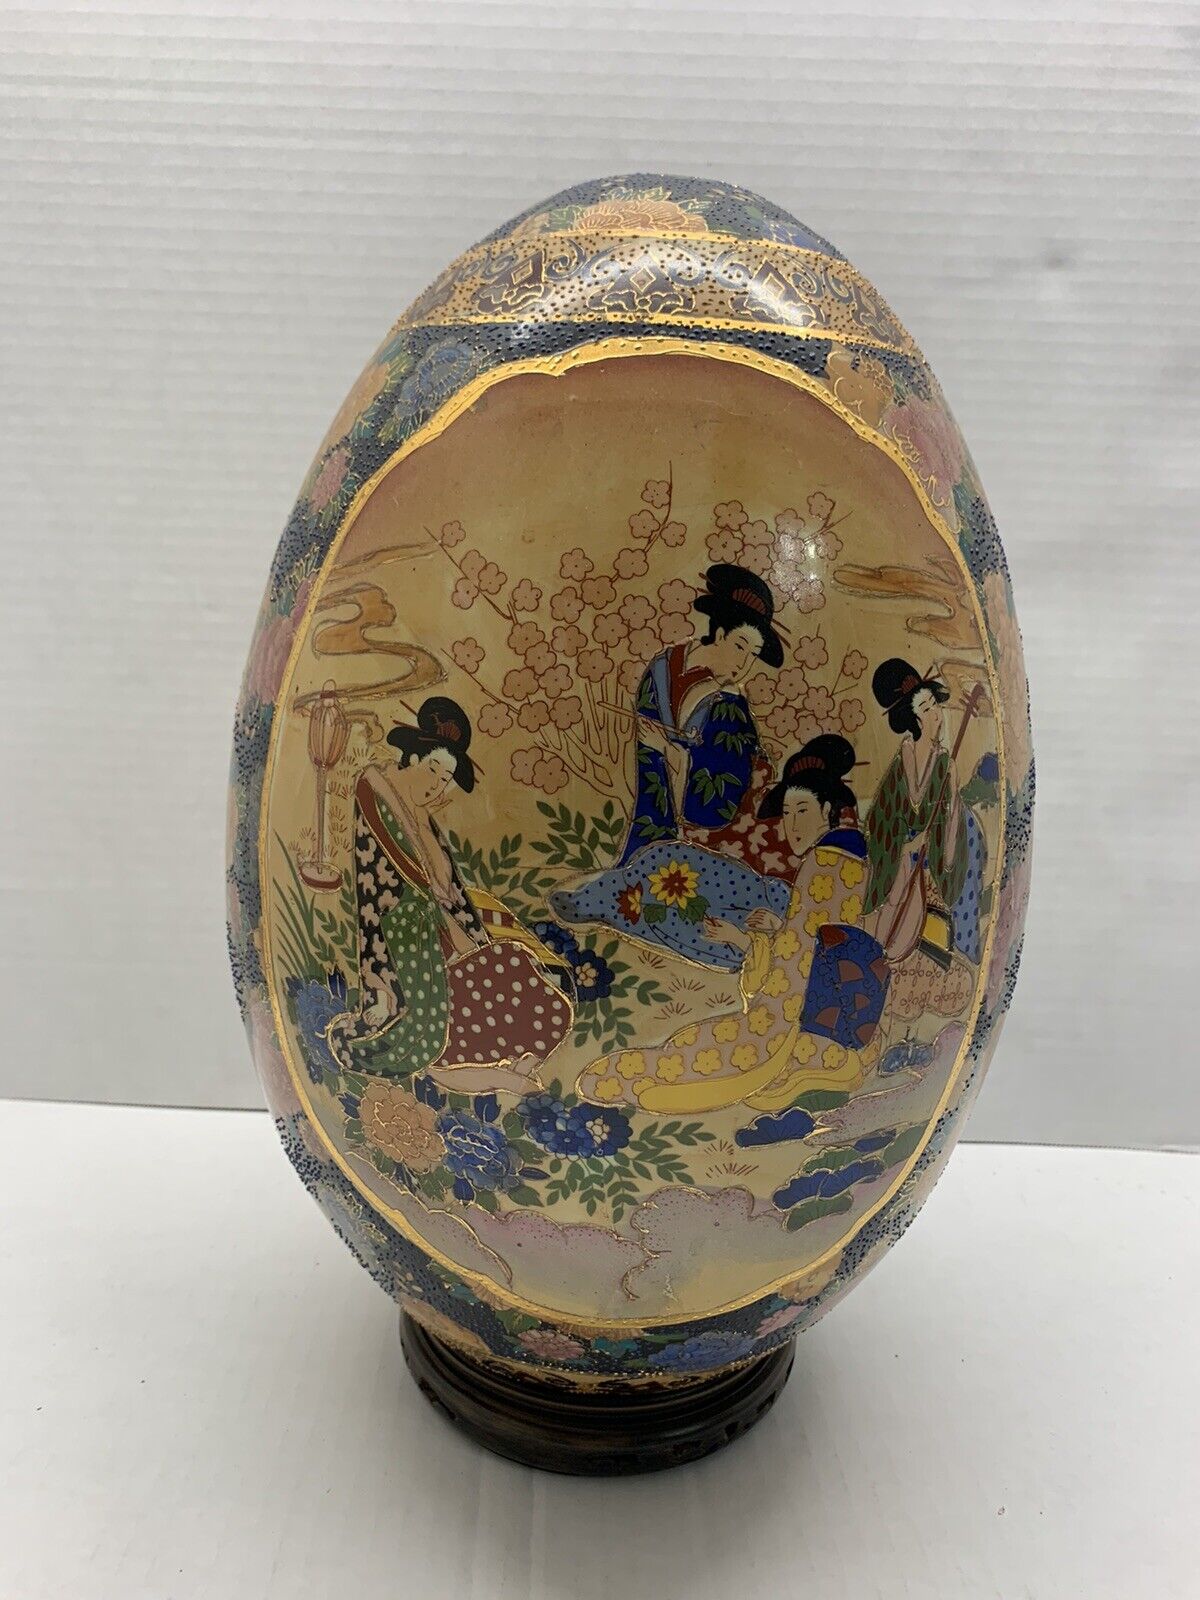 VINTAGE LARGE 14” Japanese Hand Painted Egg Sculpture - GORGEOUS